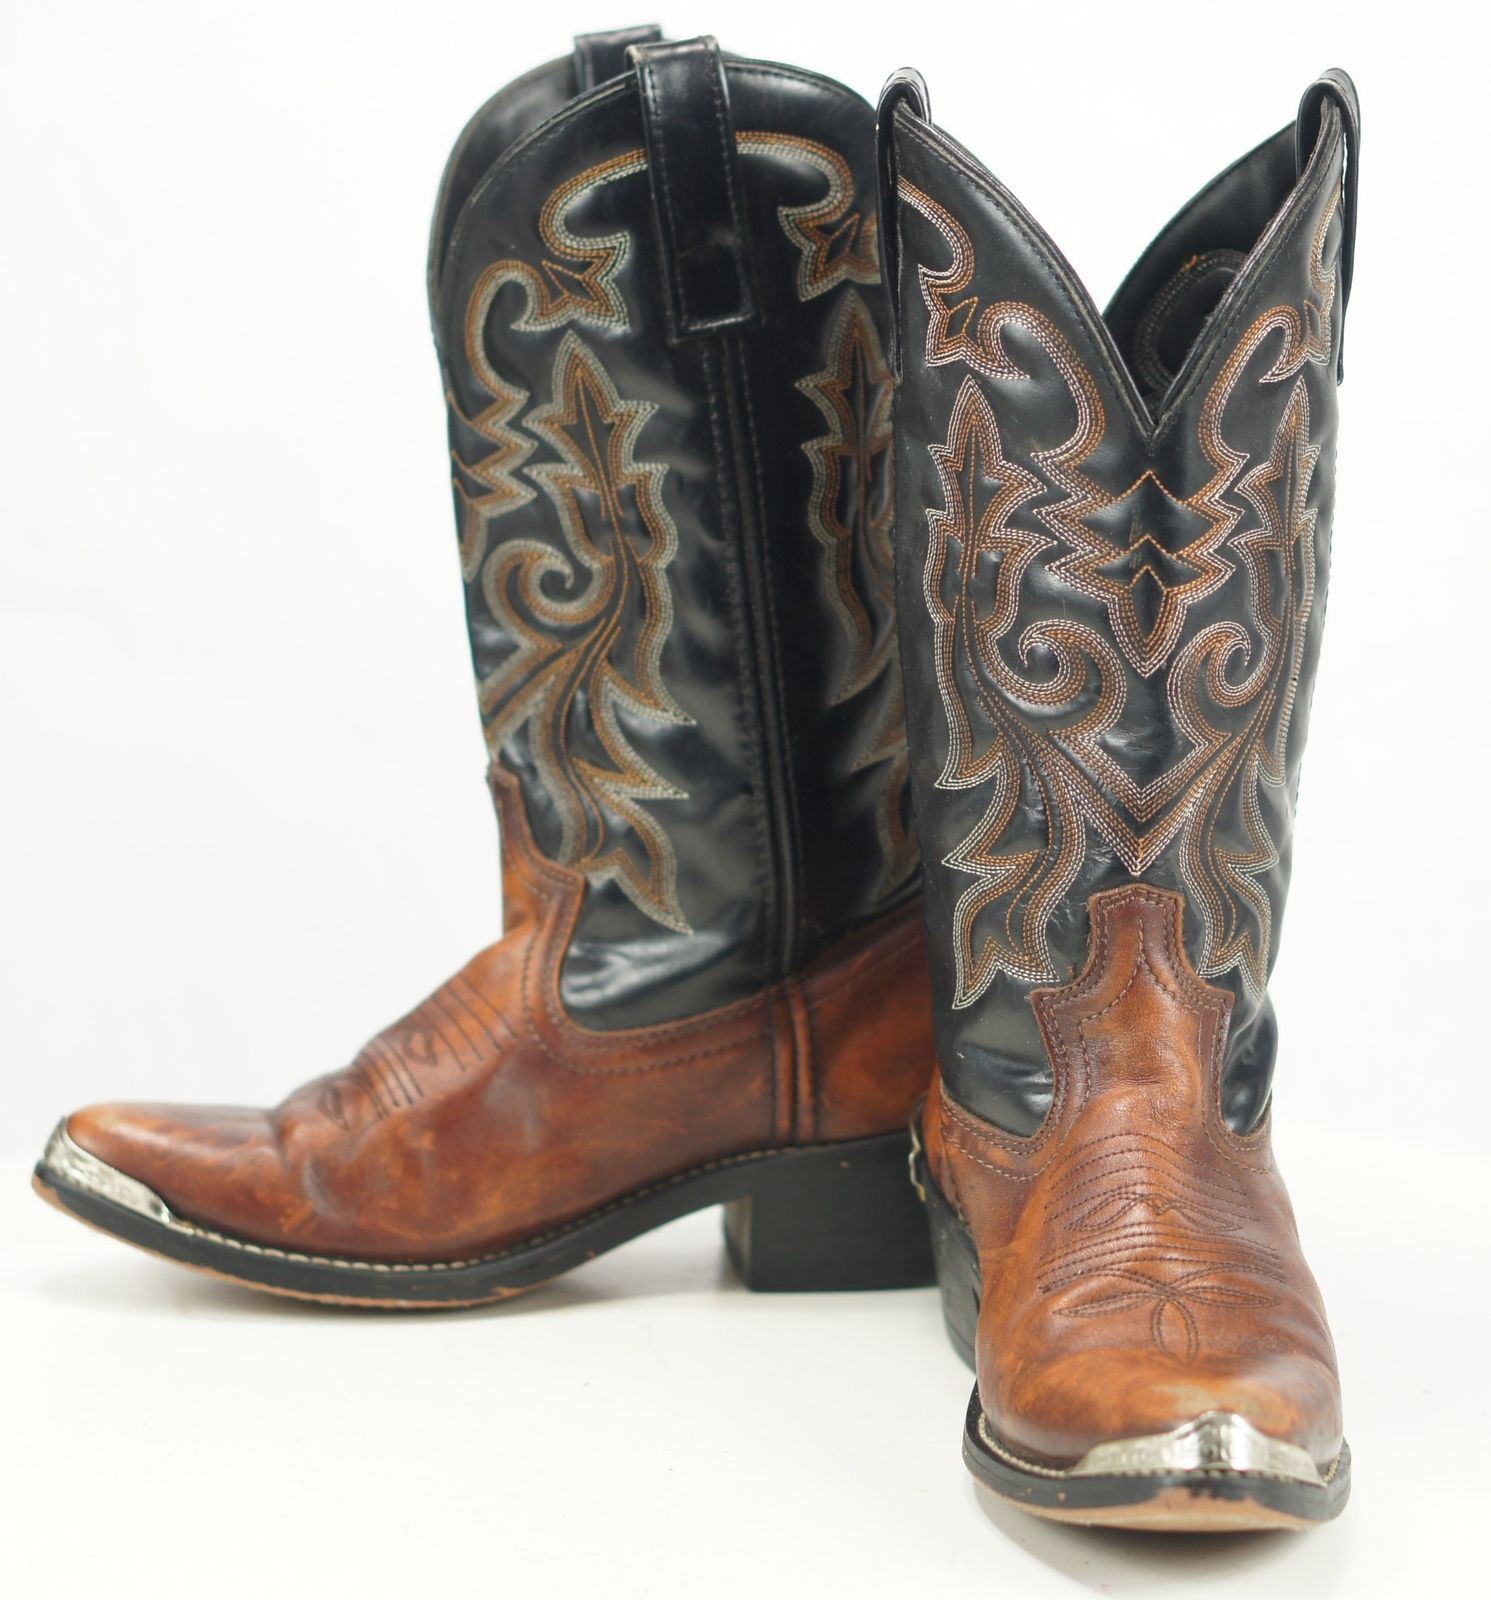 Masterson Men's Western Cowboy Boots Brown And Black Leather Silver Tips 7.5 D